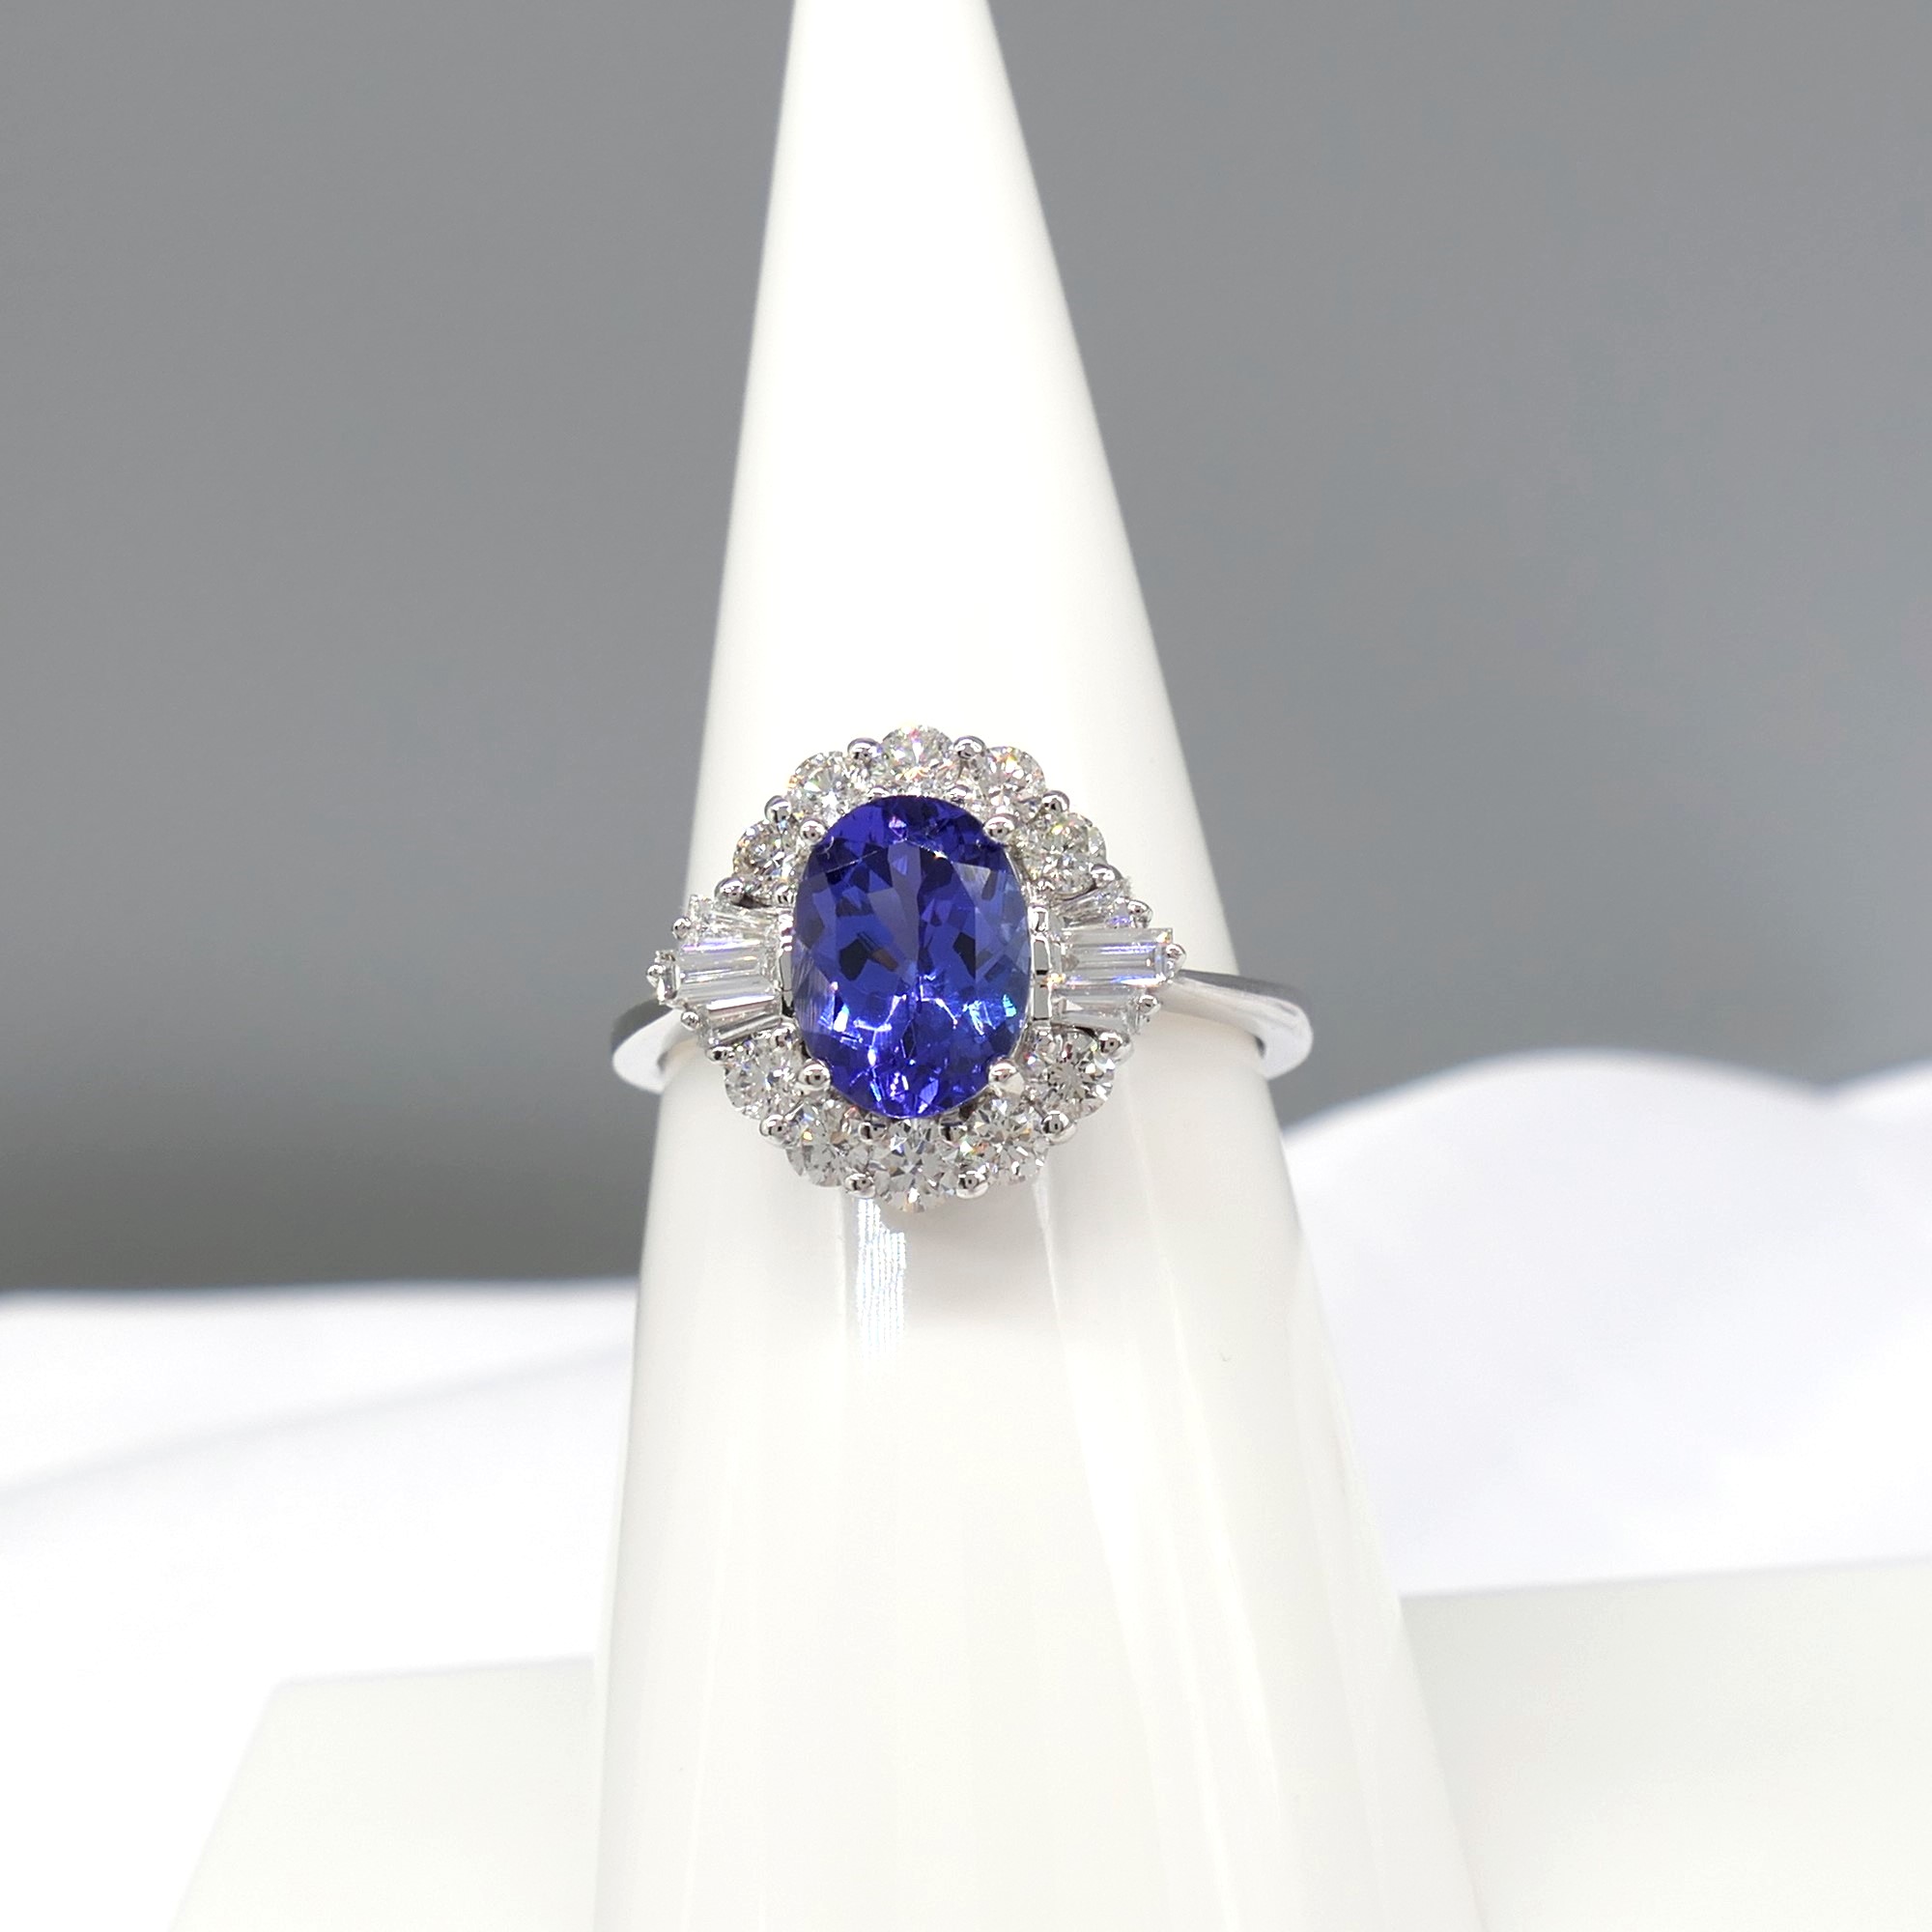 Stylish 1.37 Carat Tanzanite and 0.57 Carat Diamond Cluster Ring In 18ct White Gold - Image 4 of 7